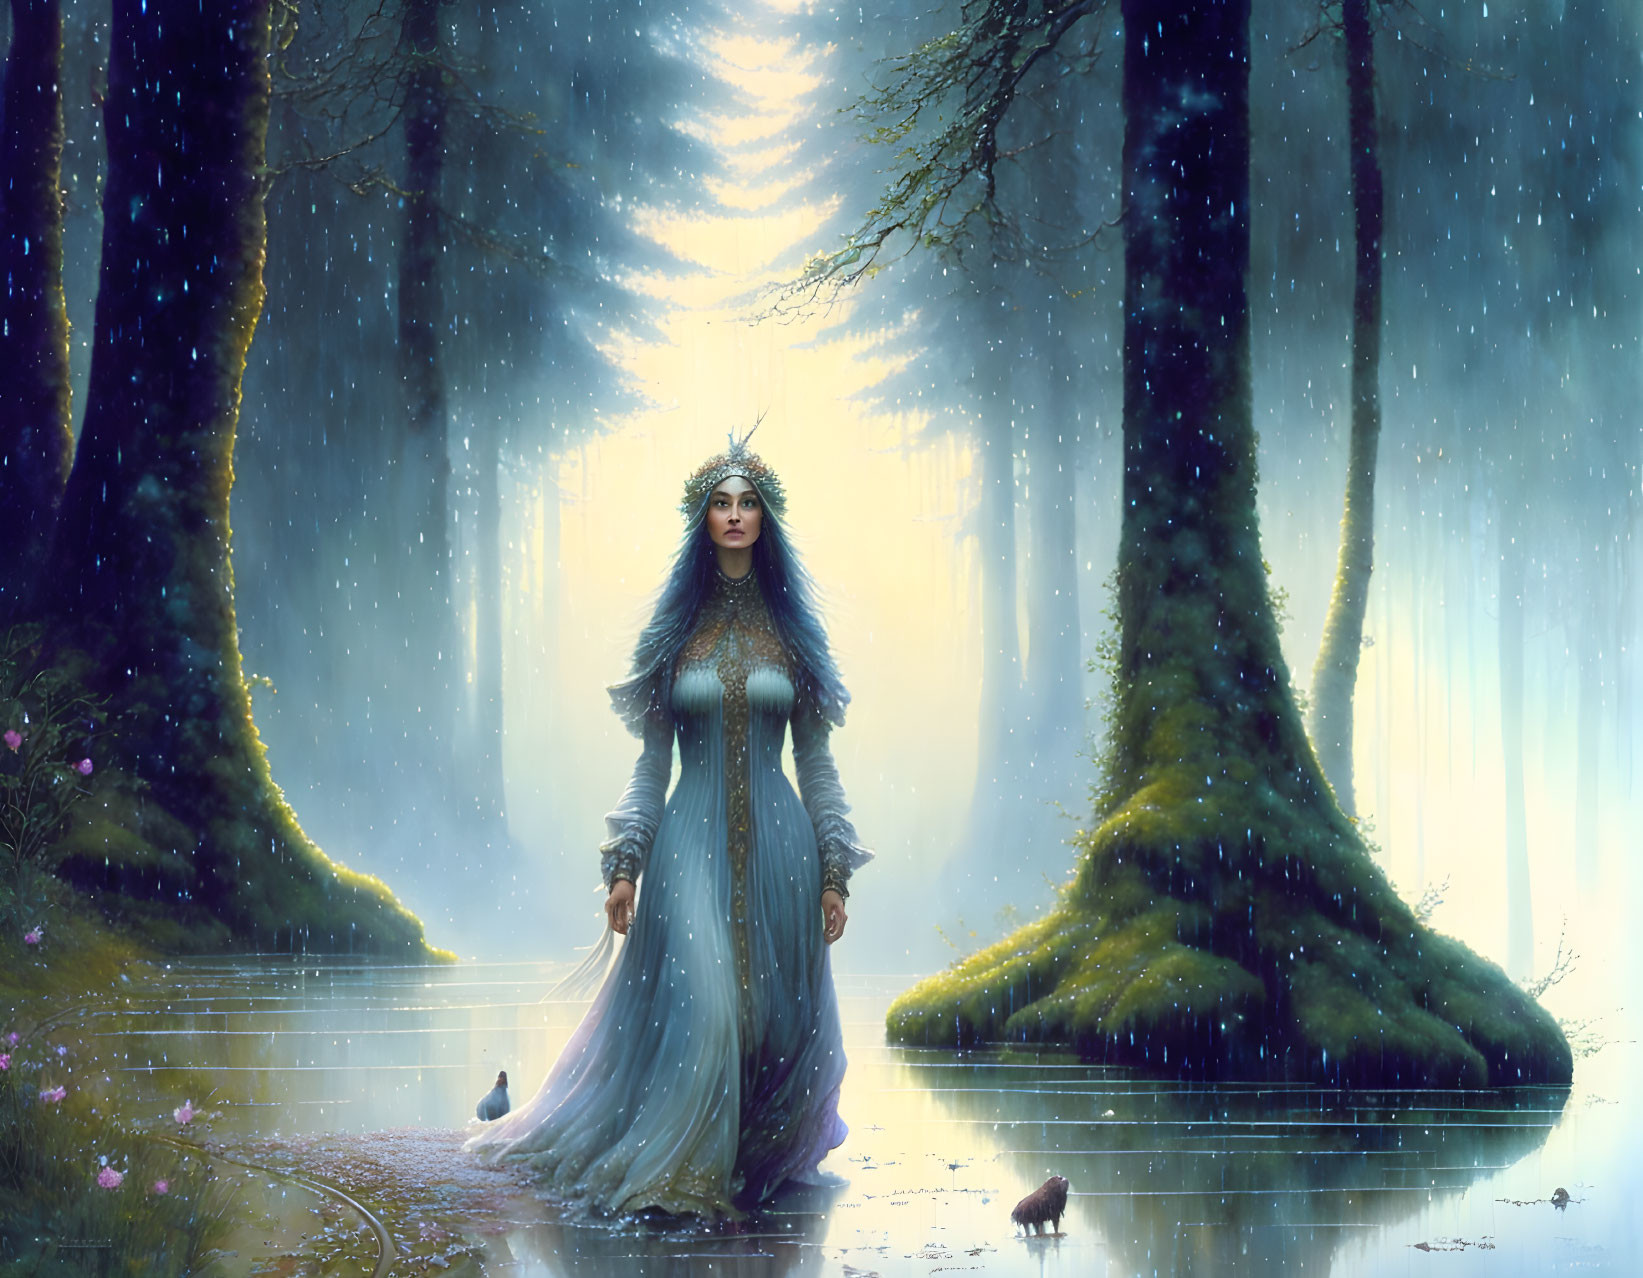 Mystical woman in blue gown and crown in enchanted forest with glowing light